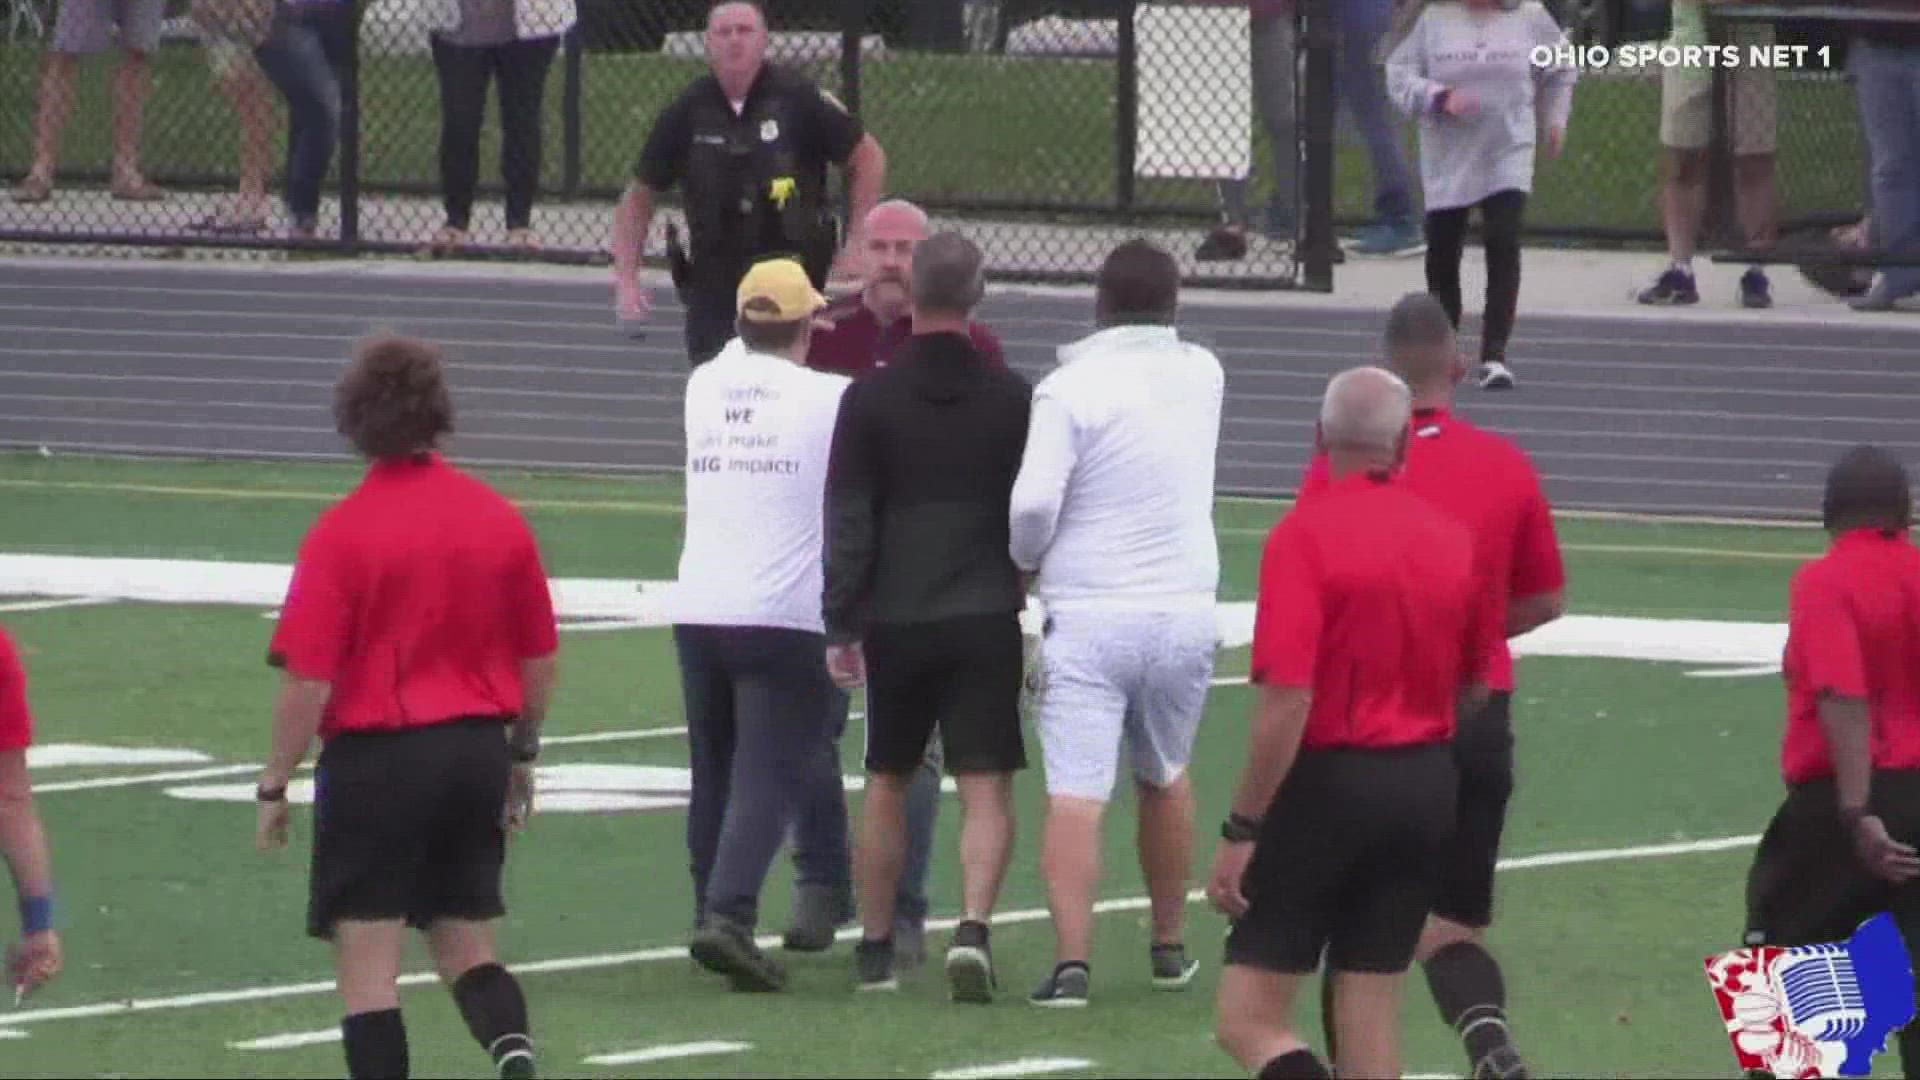 Chaos broke out on the field after a controversial penalty kick call at the end of a high school soccer tournament game last weekend.